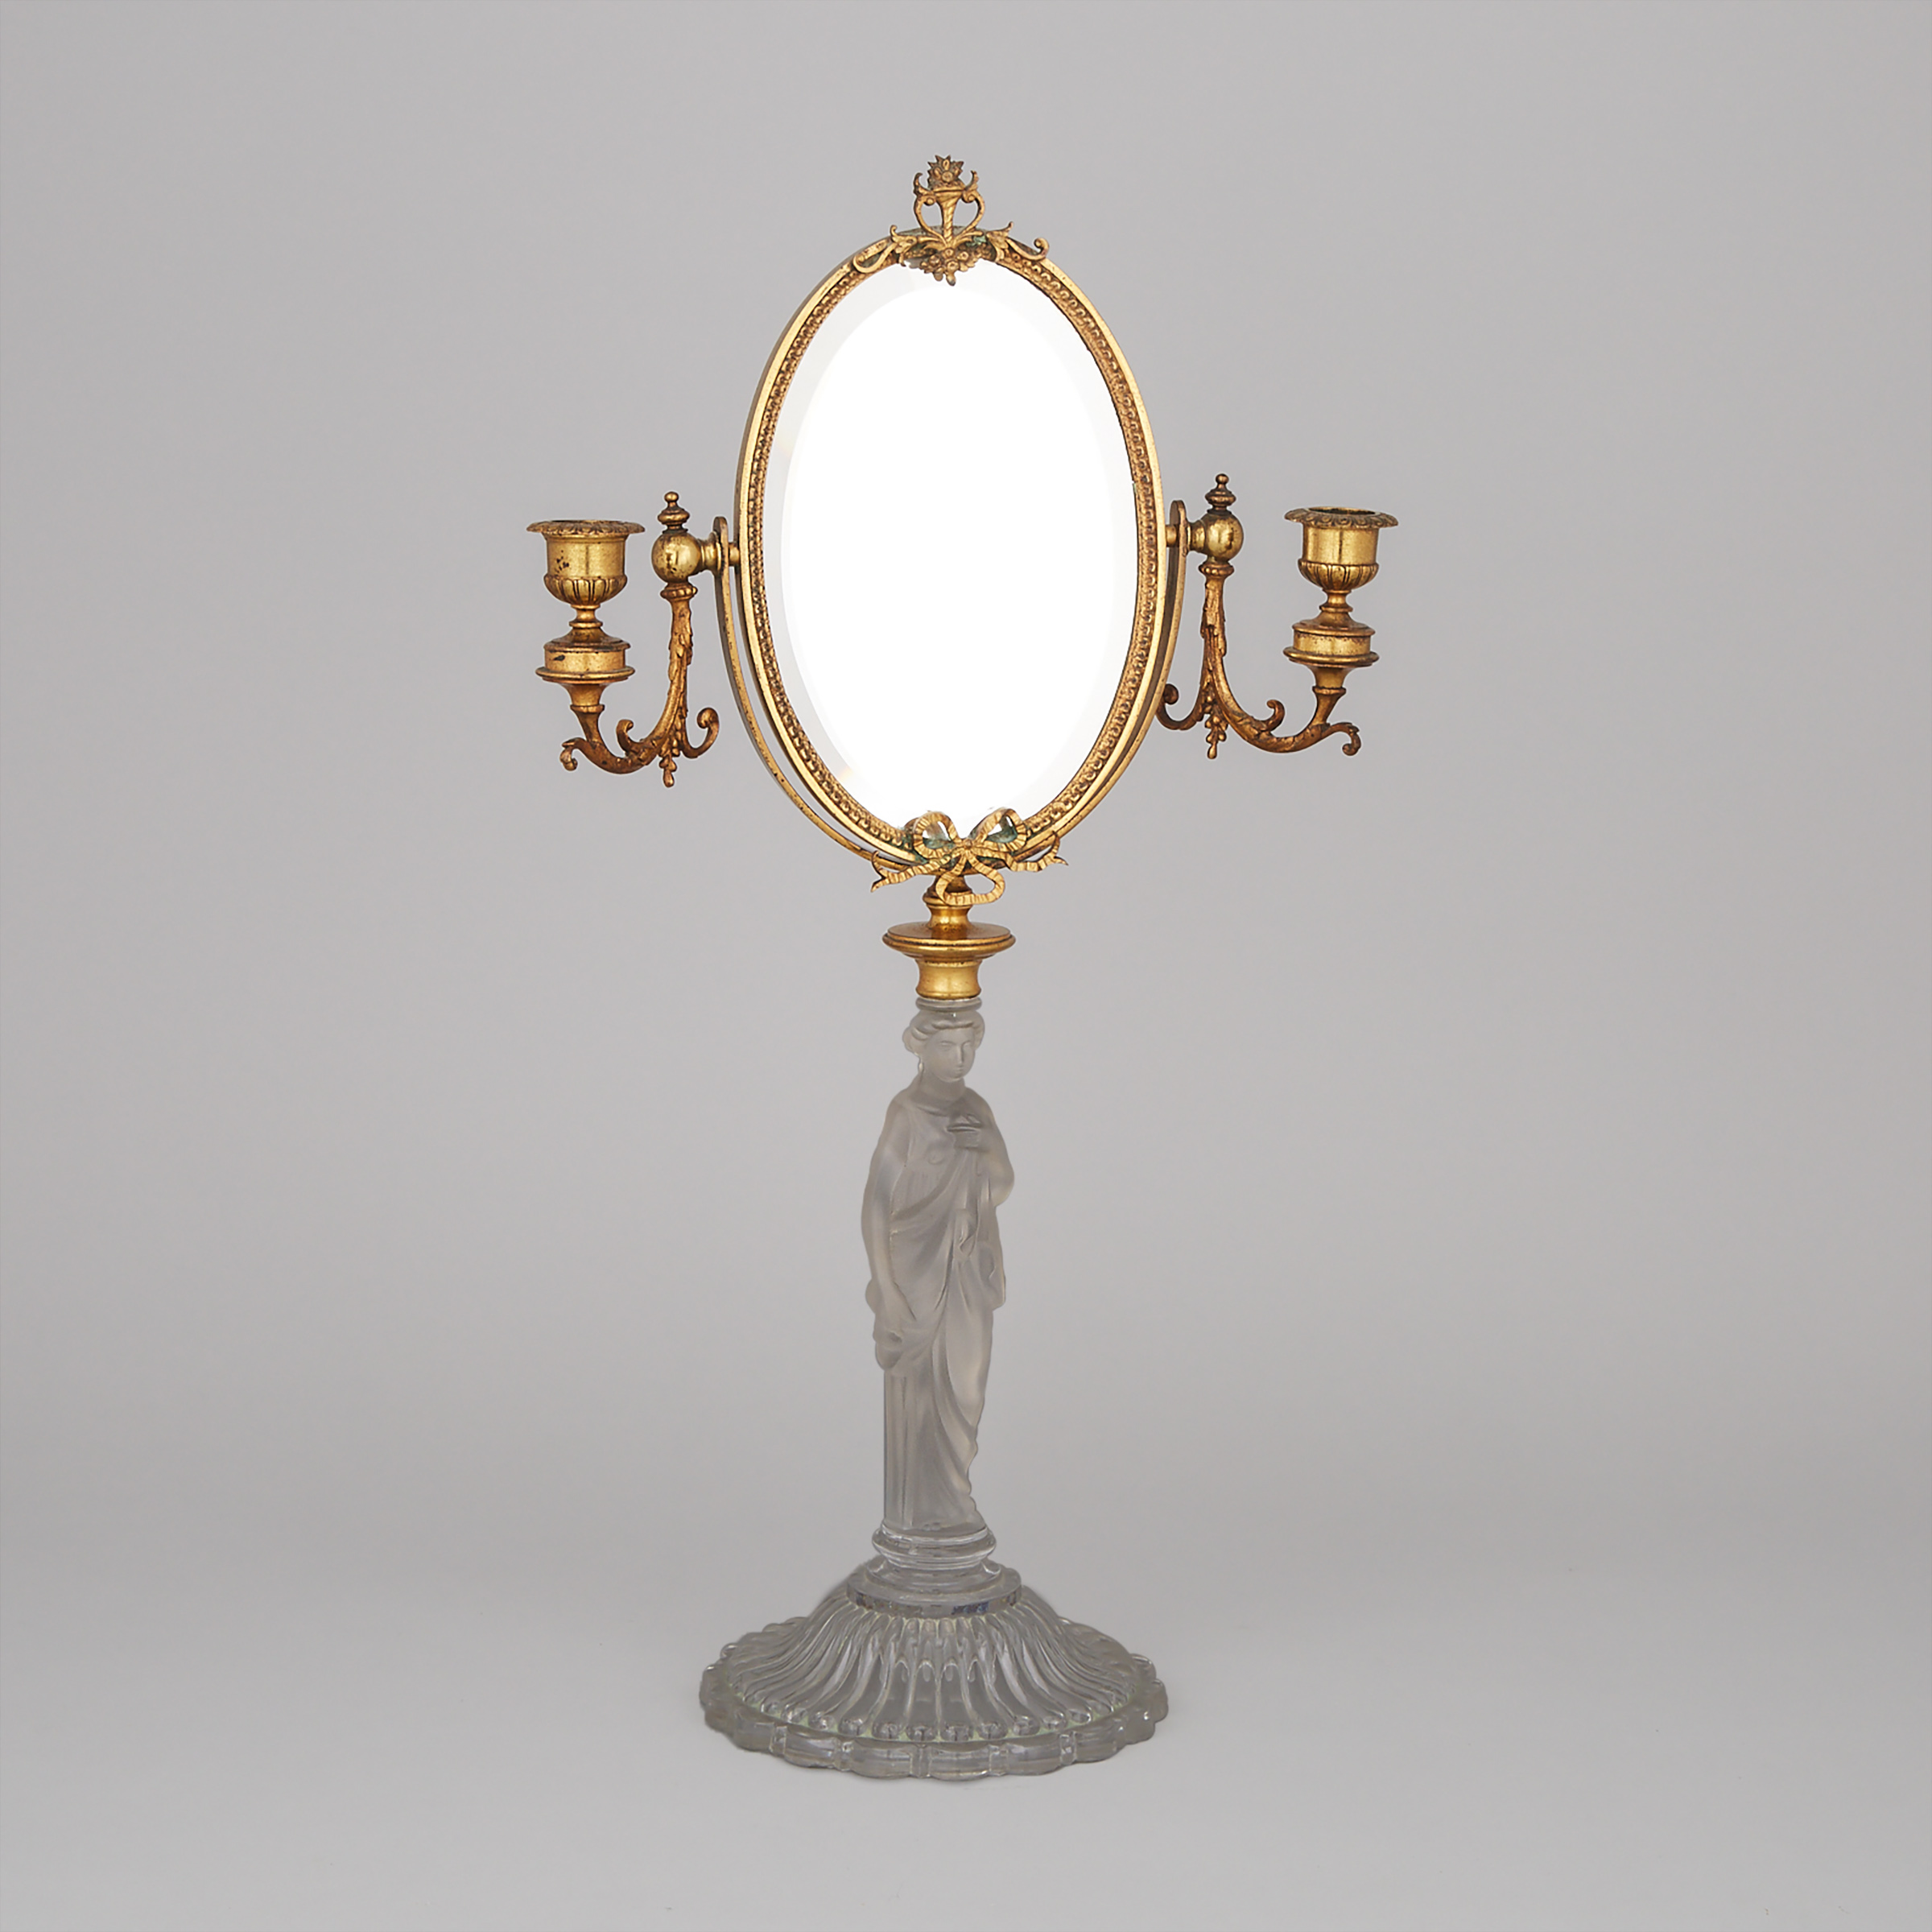 Baccarat Figural Frosted Glass and Gilt Bronze Toilet Mirror, c.1900